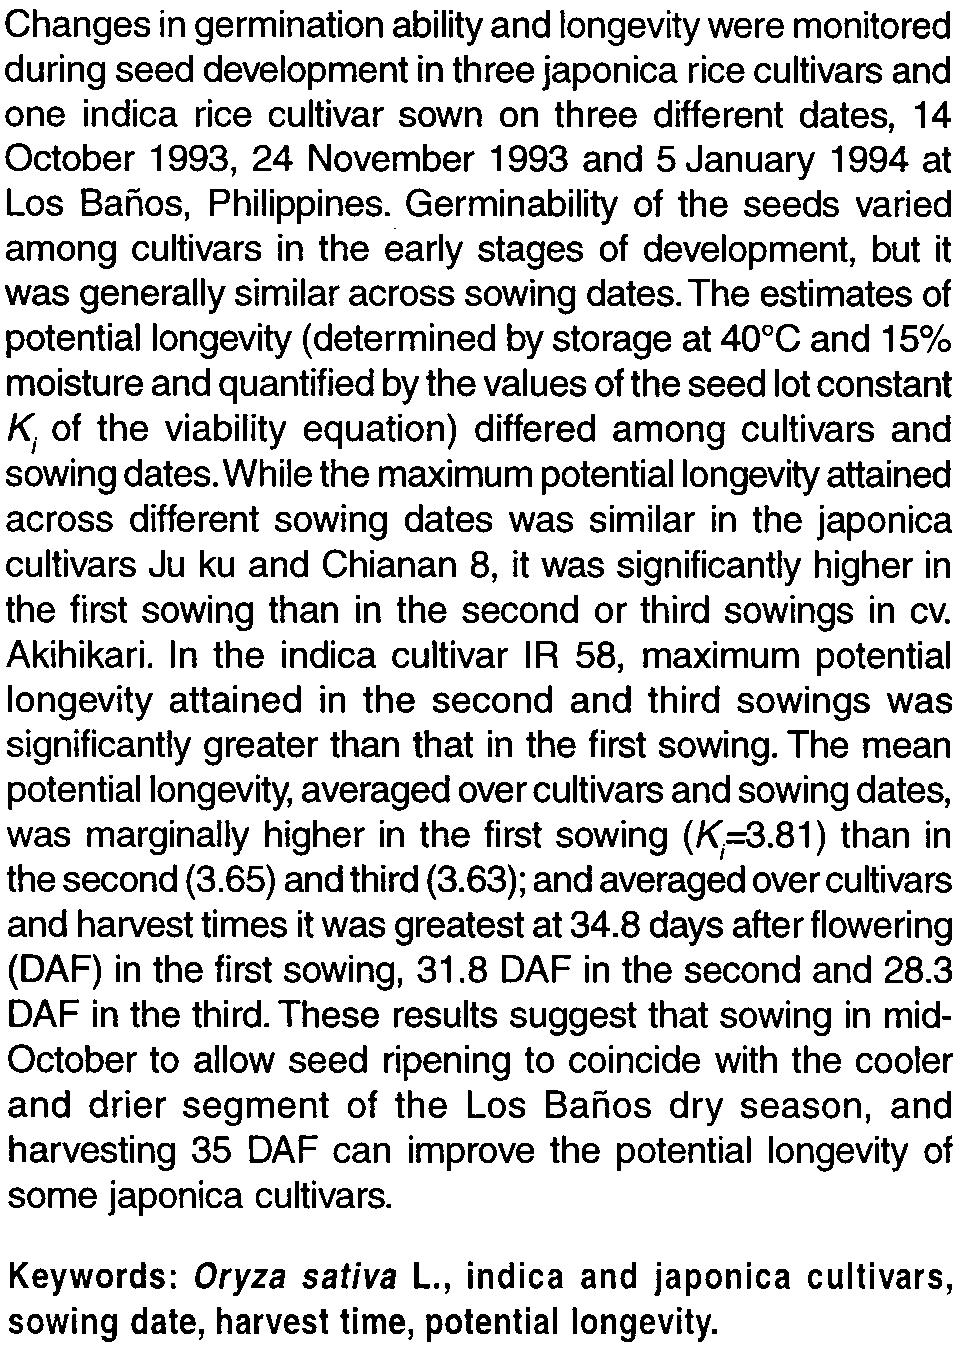 .. Abstract Changes in germination ability and longevity were monitored during seed development in three japonica rice cultivars and one indica rice cultivar sown on three different dates, 14 October